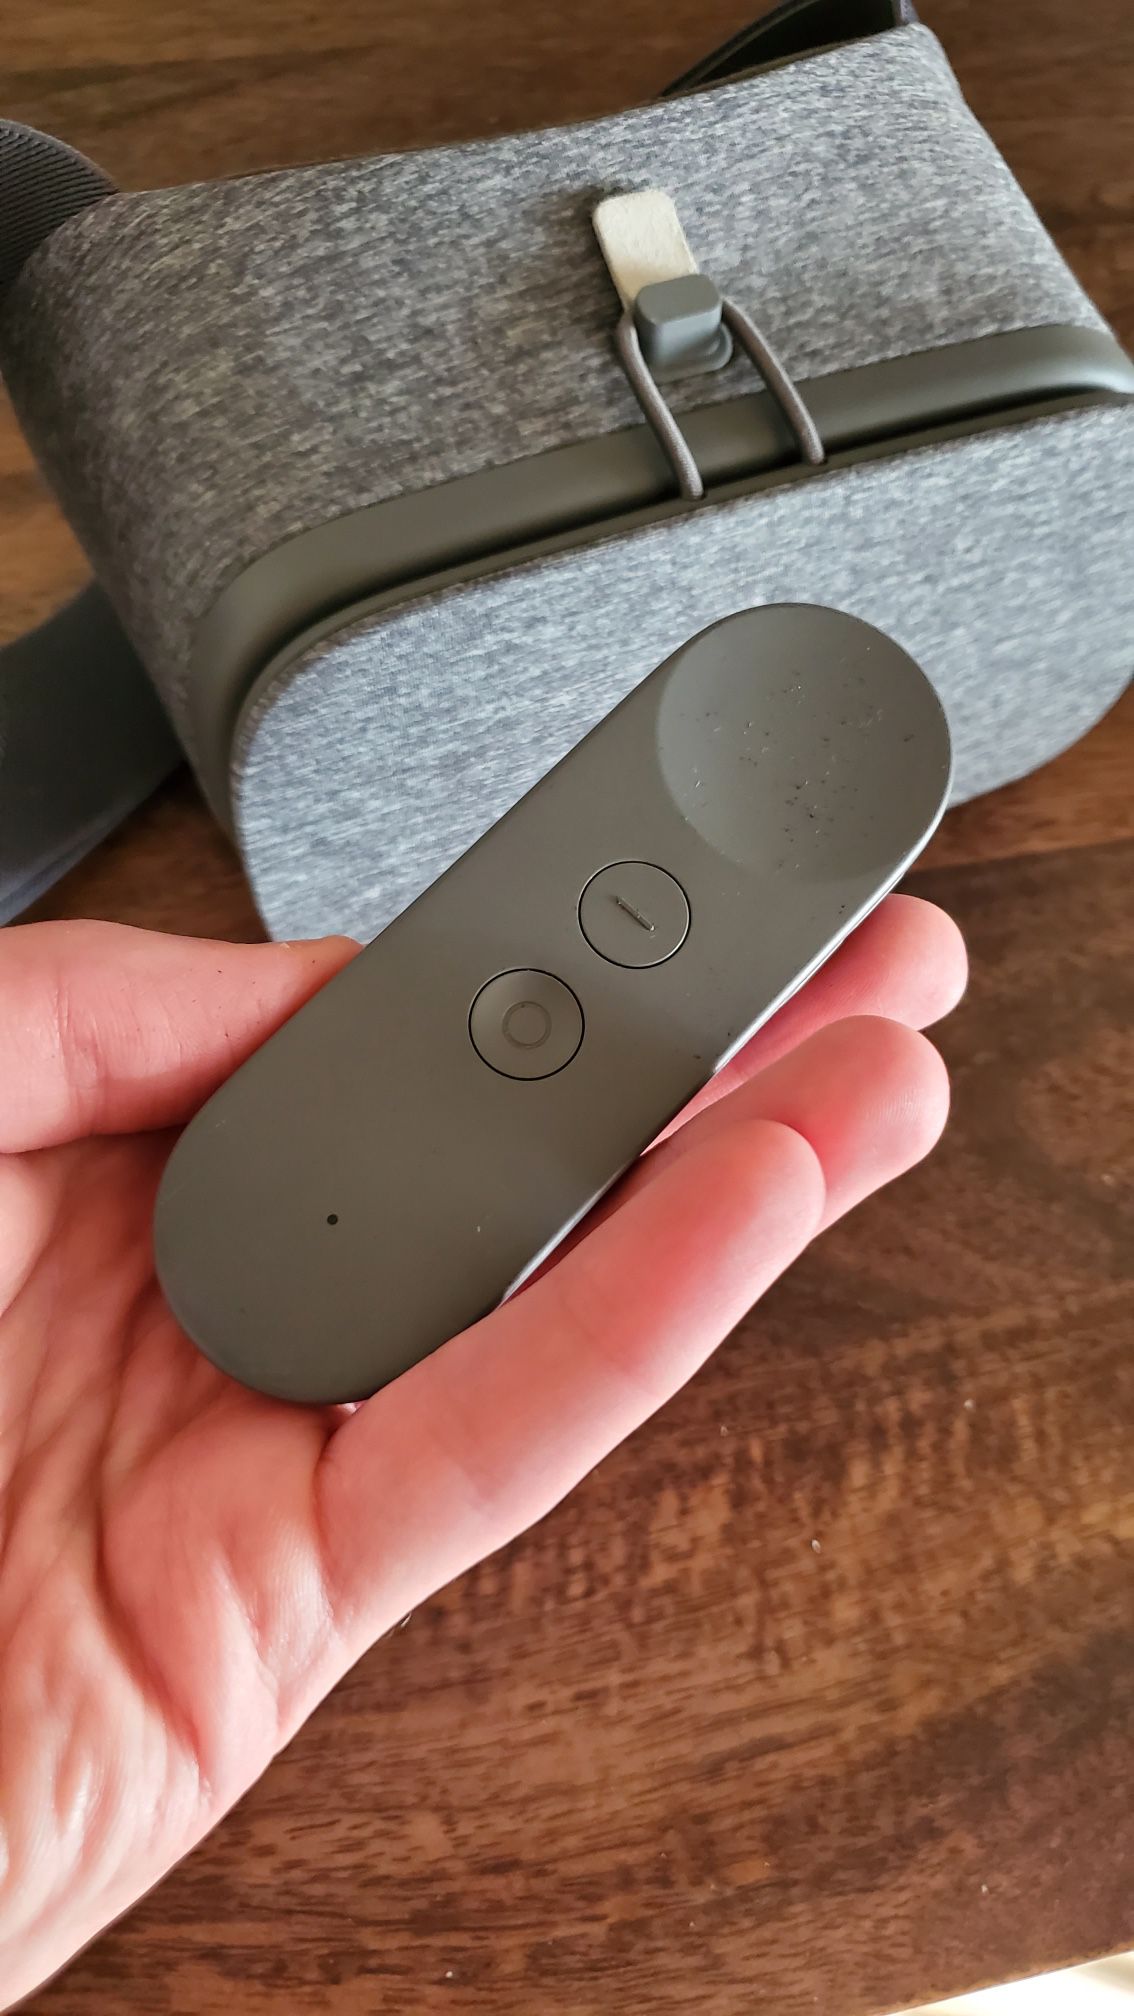 Google Daydream View 2 Charcoal Grey Virtual Reality / VR Headset